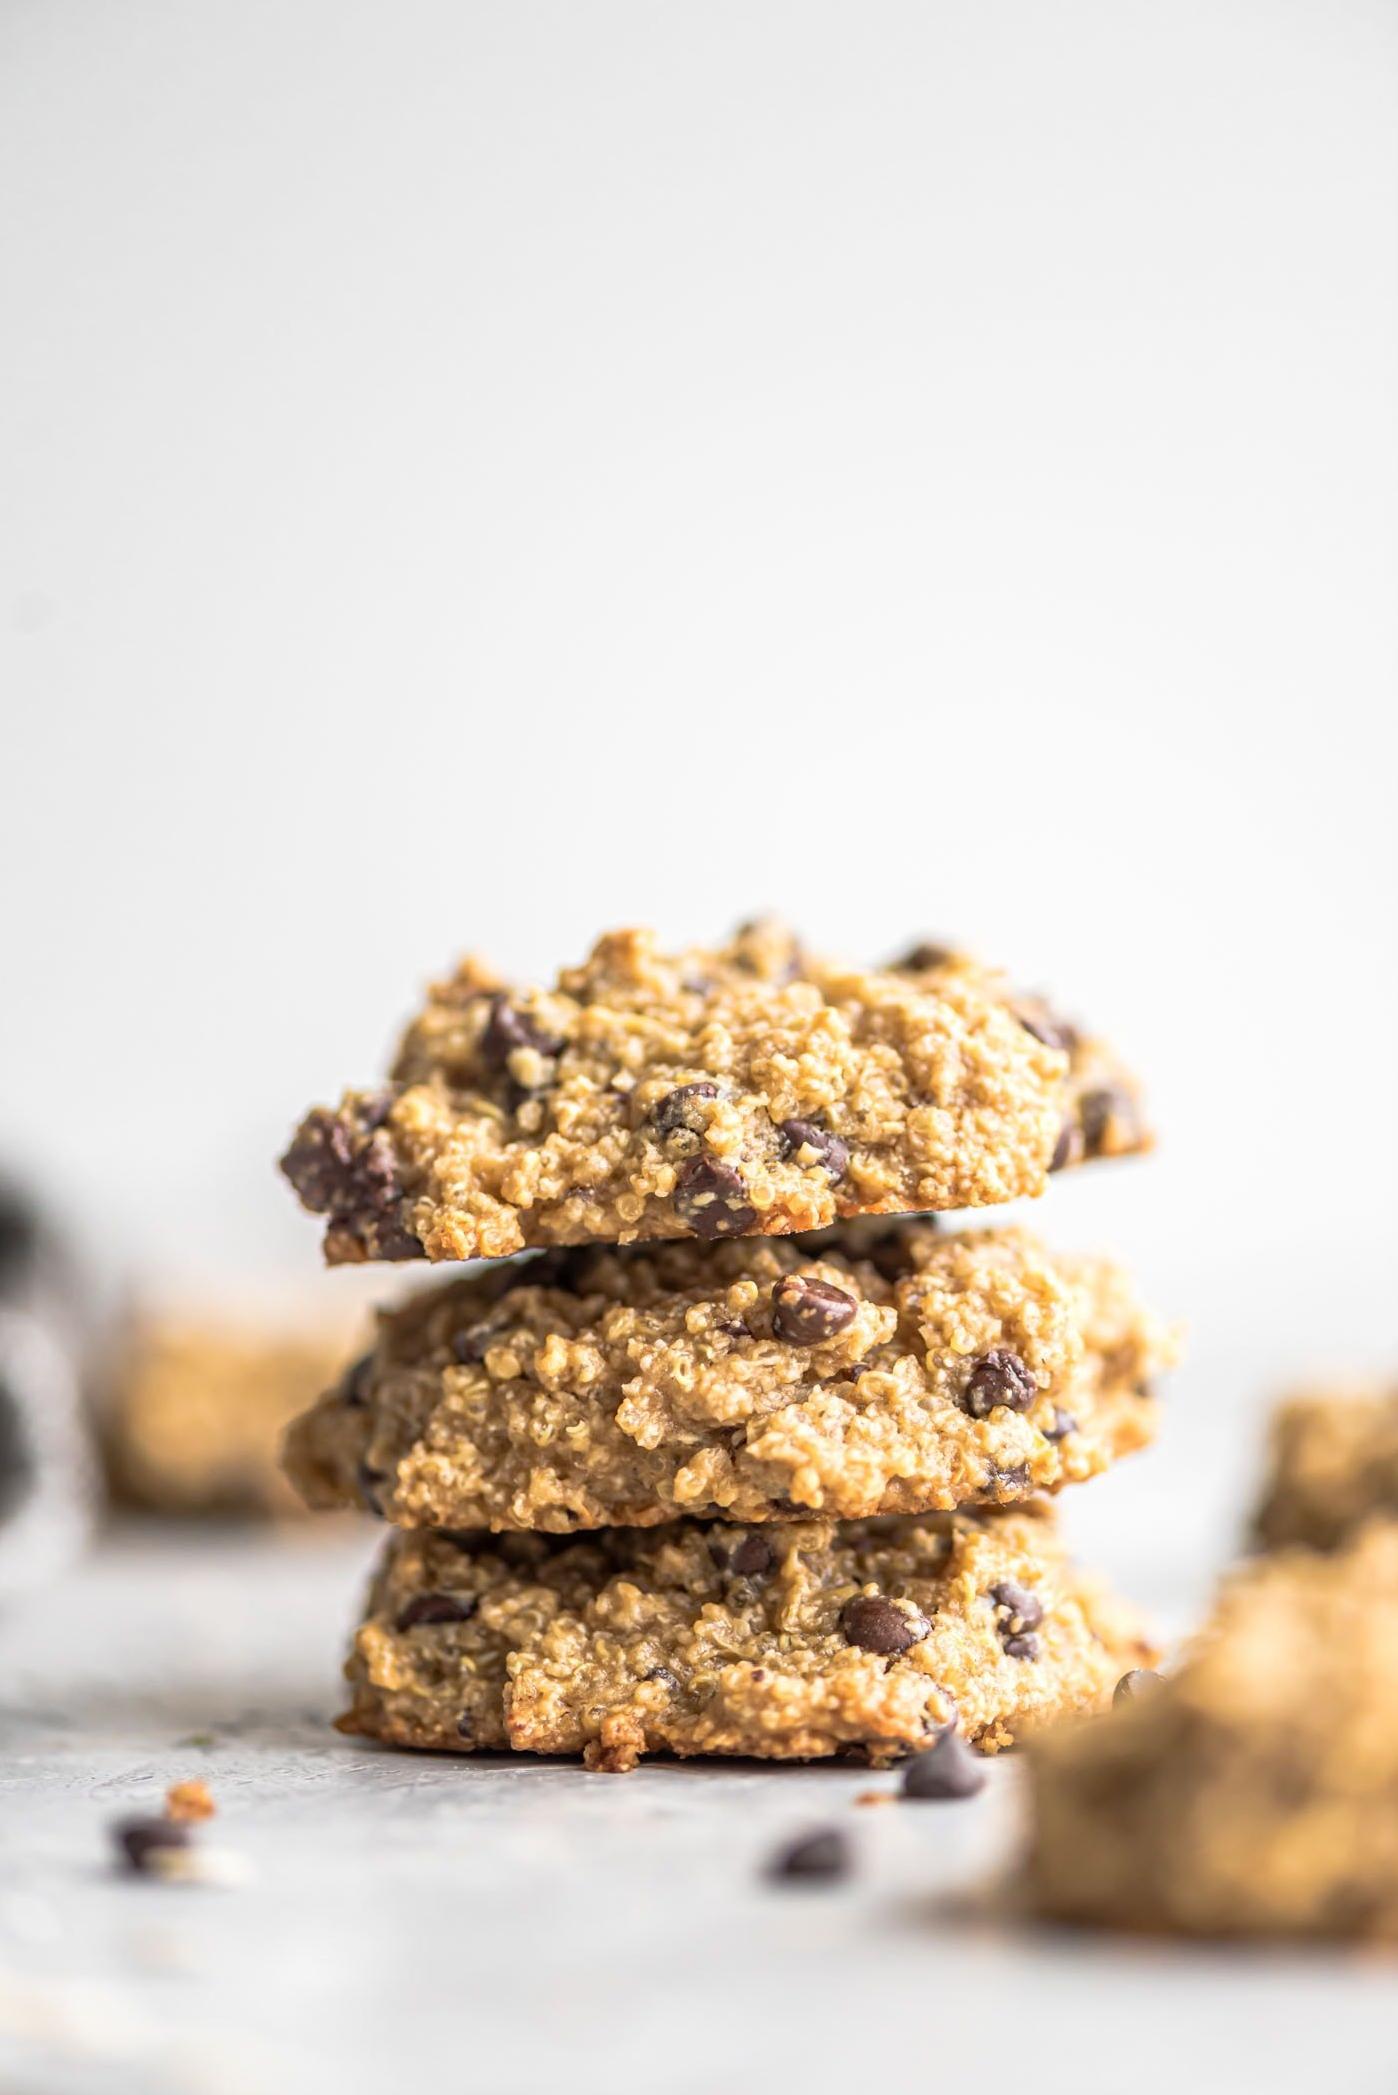  This recipe is perfect if you're looking for a healthy alternative to traditional cookies